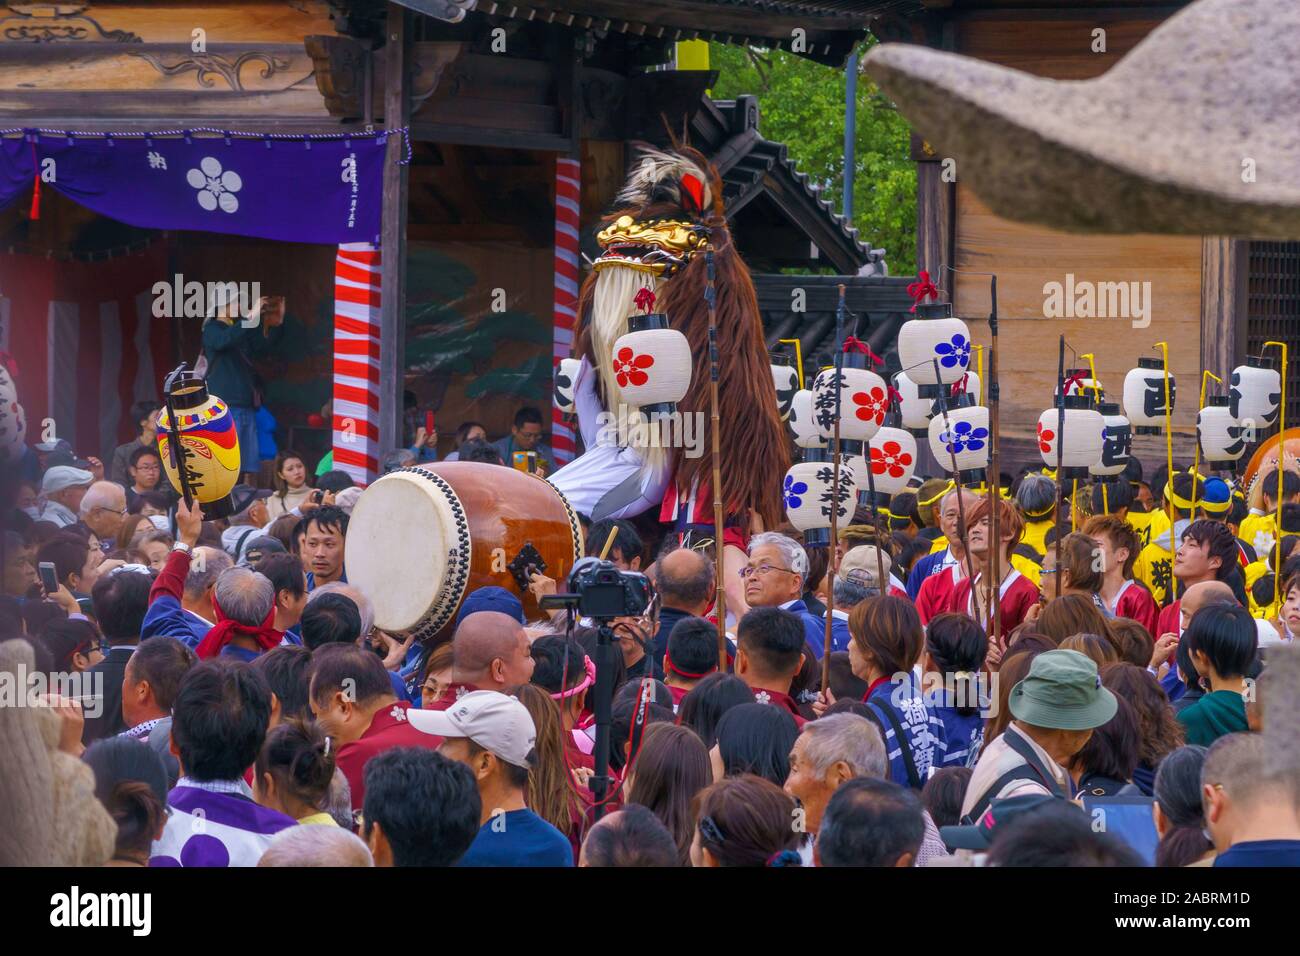 Himeji, Japan - October 15, 2019: Traditional dance of hair lion ceremony (shishimai), with men switch in lion costume. Part of the autumn festival of Stock Photo